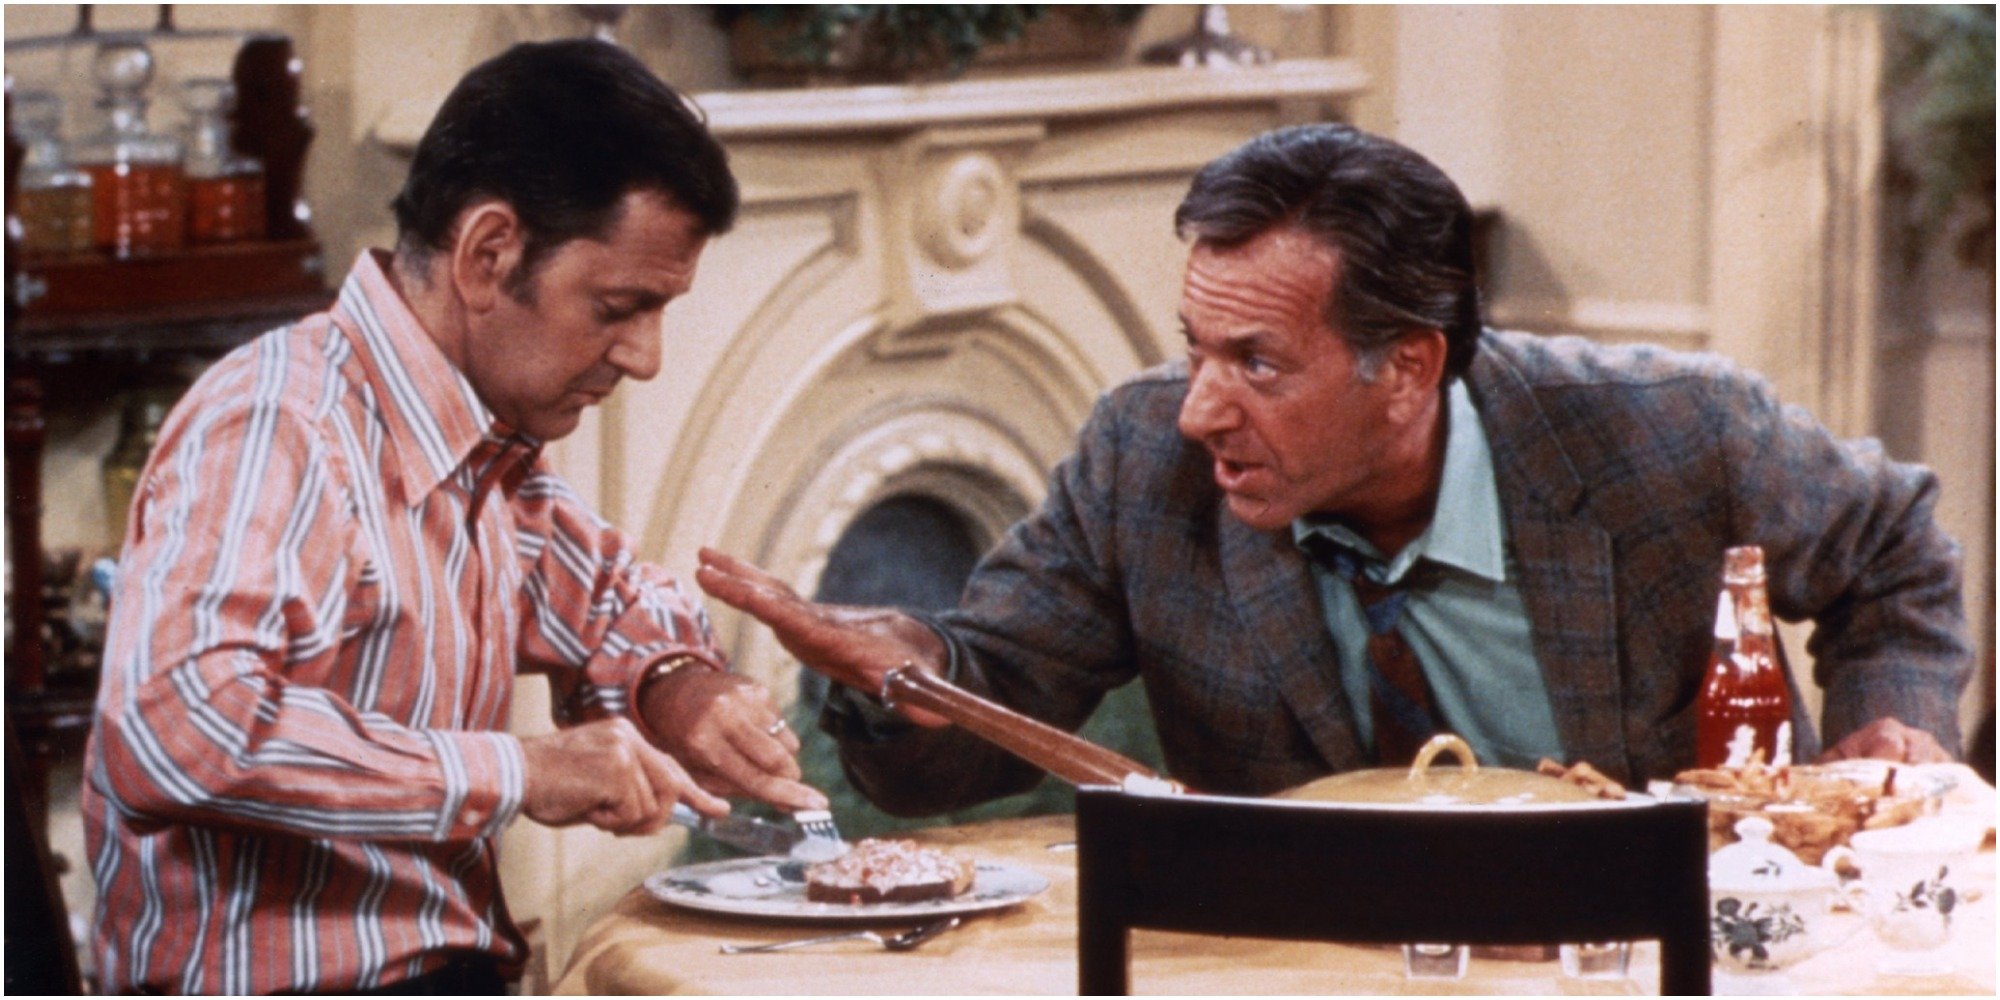 Tony Randall and Jack Klugman on the set of "The Odd Couple."